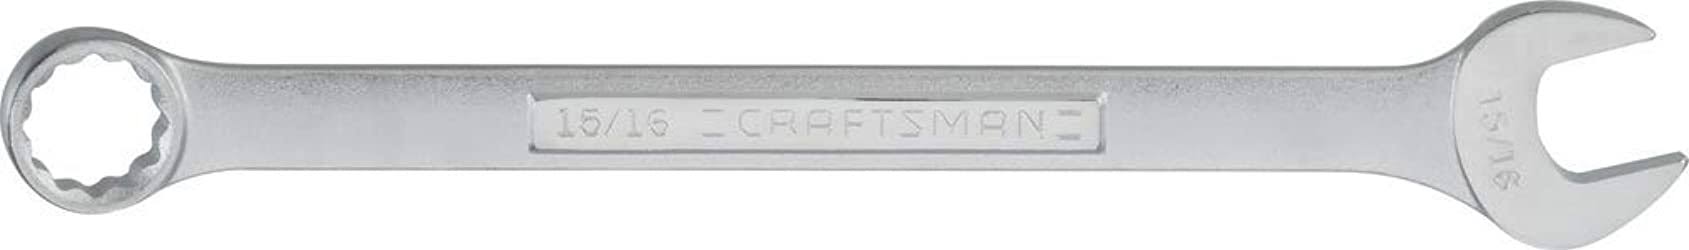 Craftsman Combination Wrench, SAE, 15/16-Inch (CMMT44704)